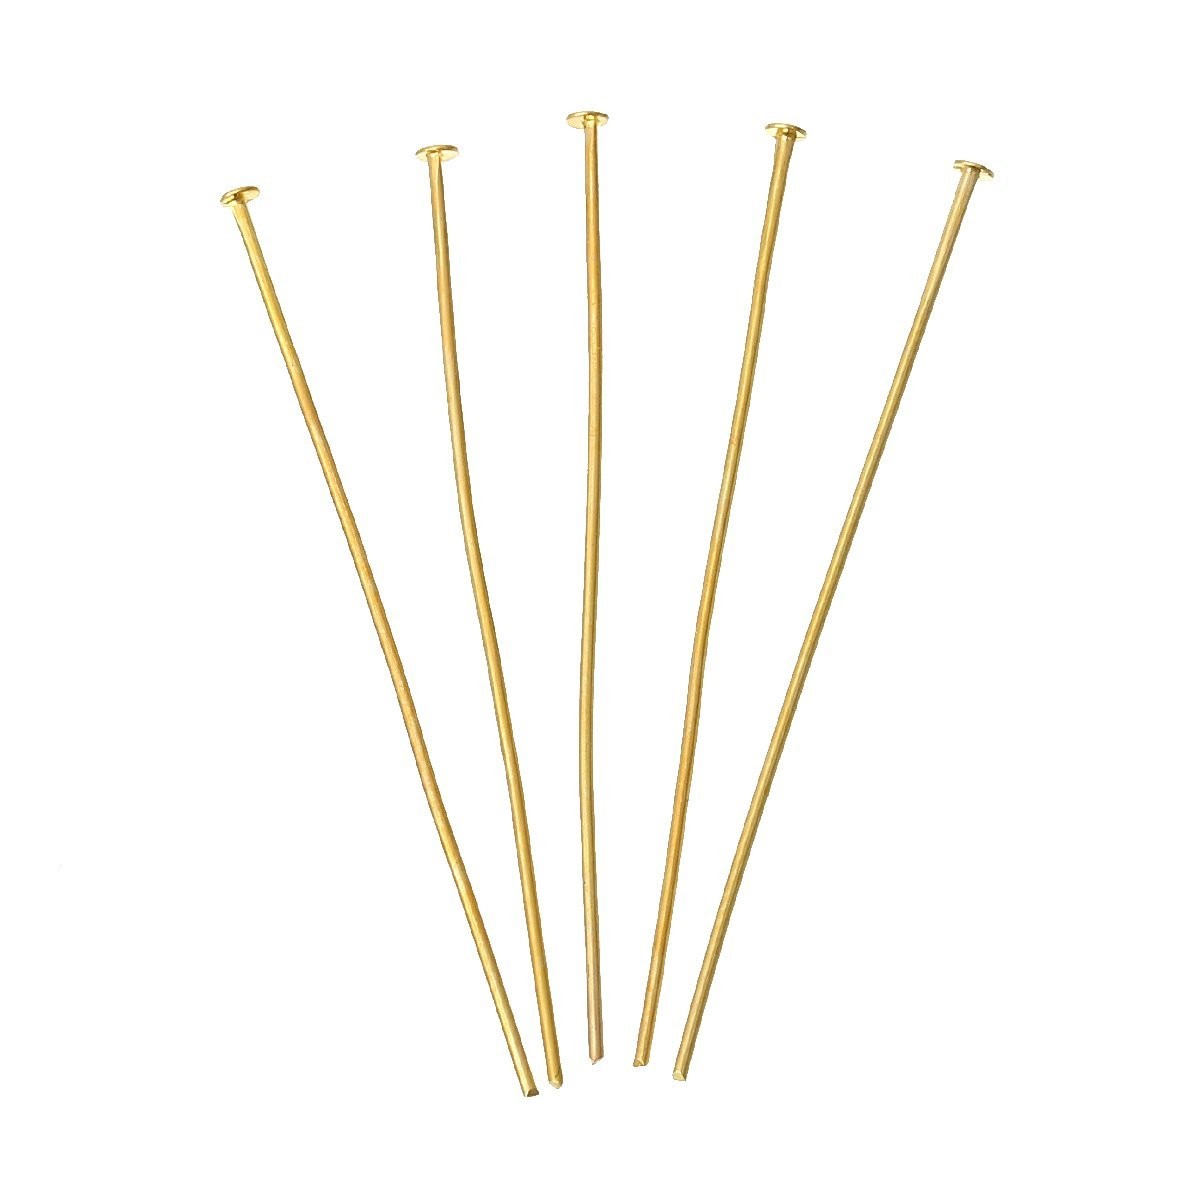 50 x Gold Plated Head Pins, 50mm